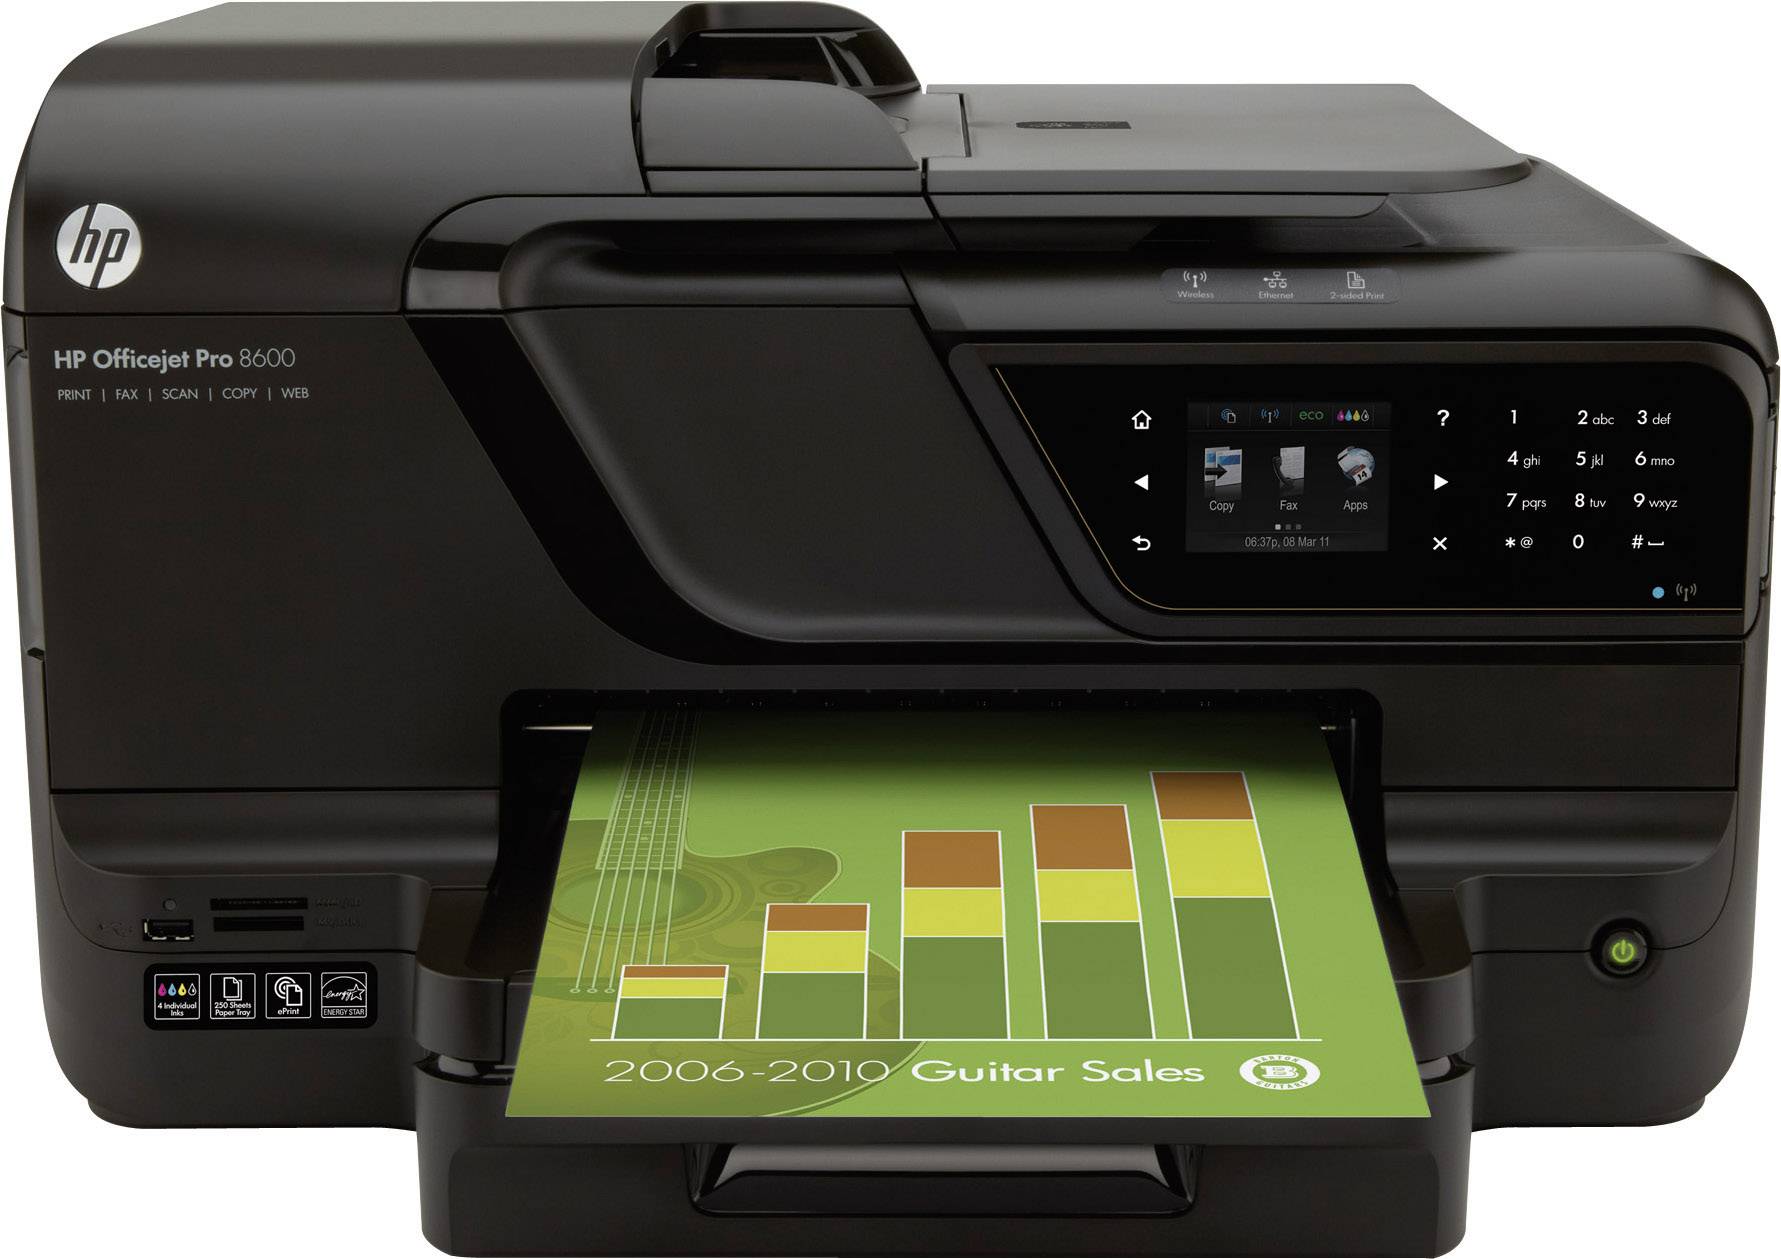 Imprimante Multifonction Hp Officejet Pro 8600 E All In One N911a Conradfr 3645